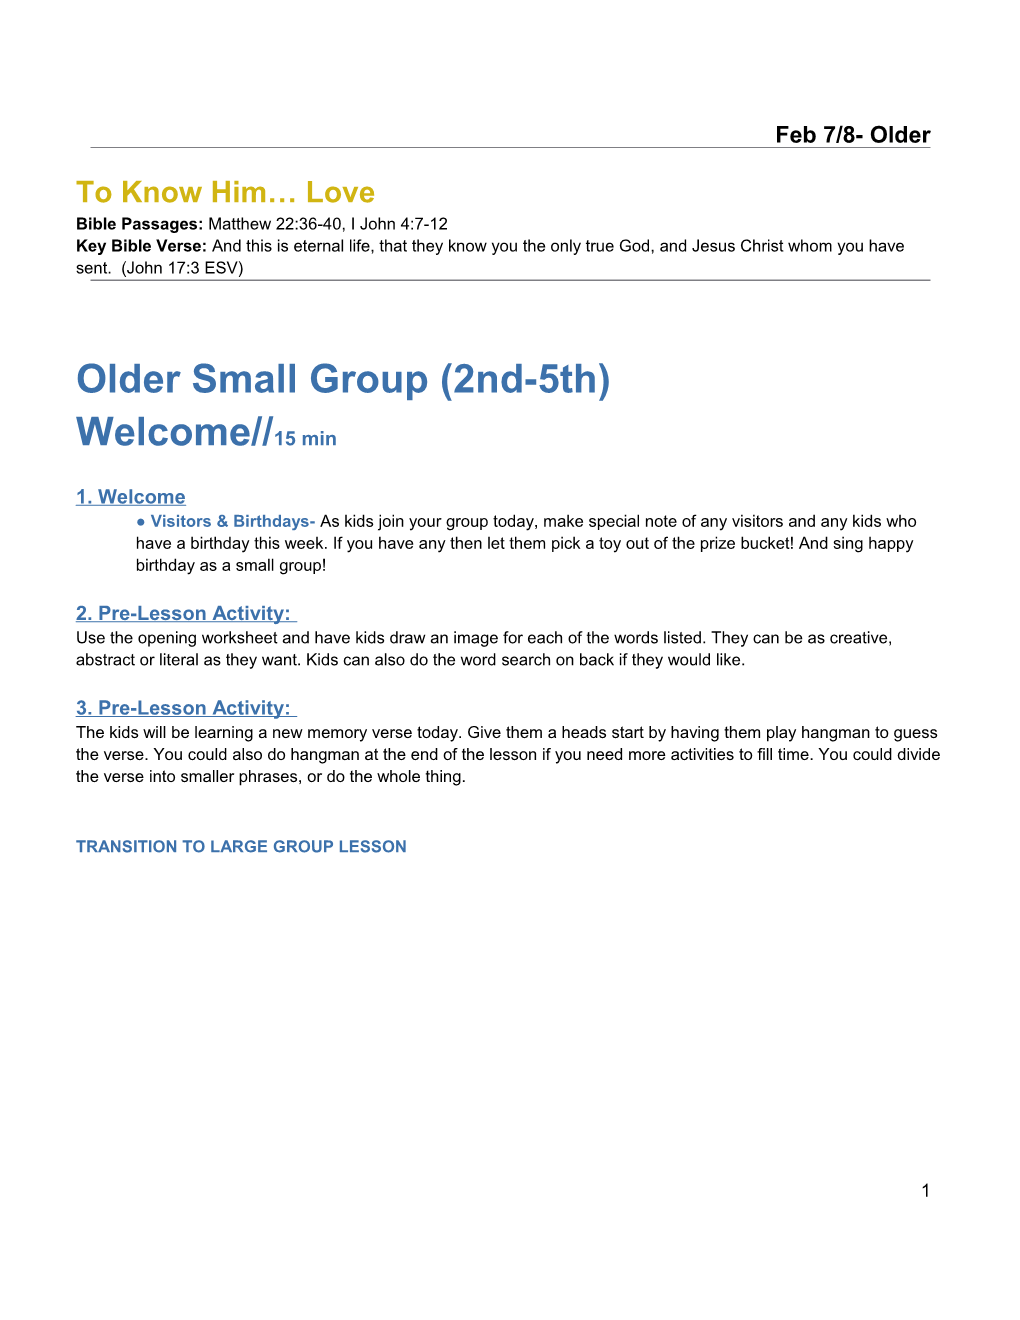 Love- Older Small Group